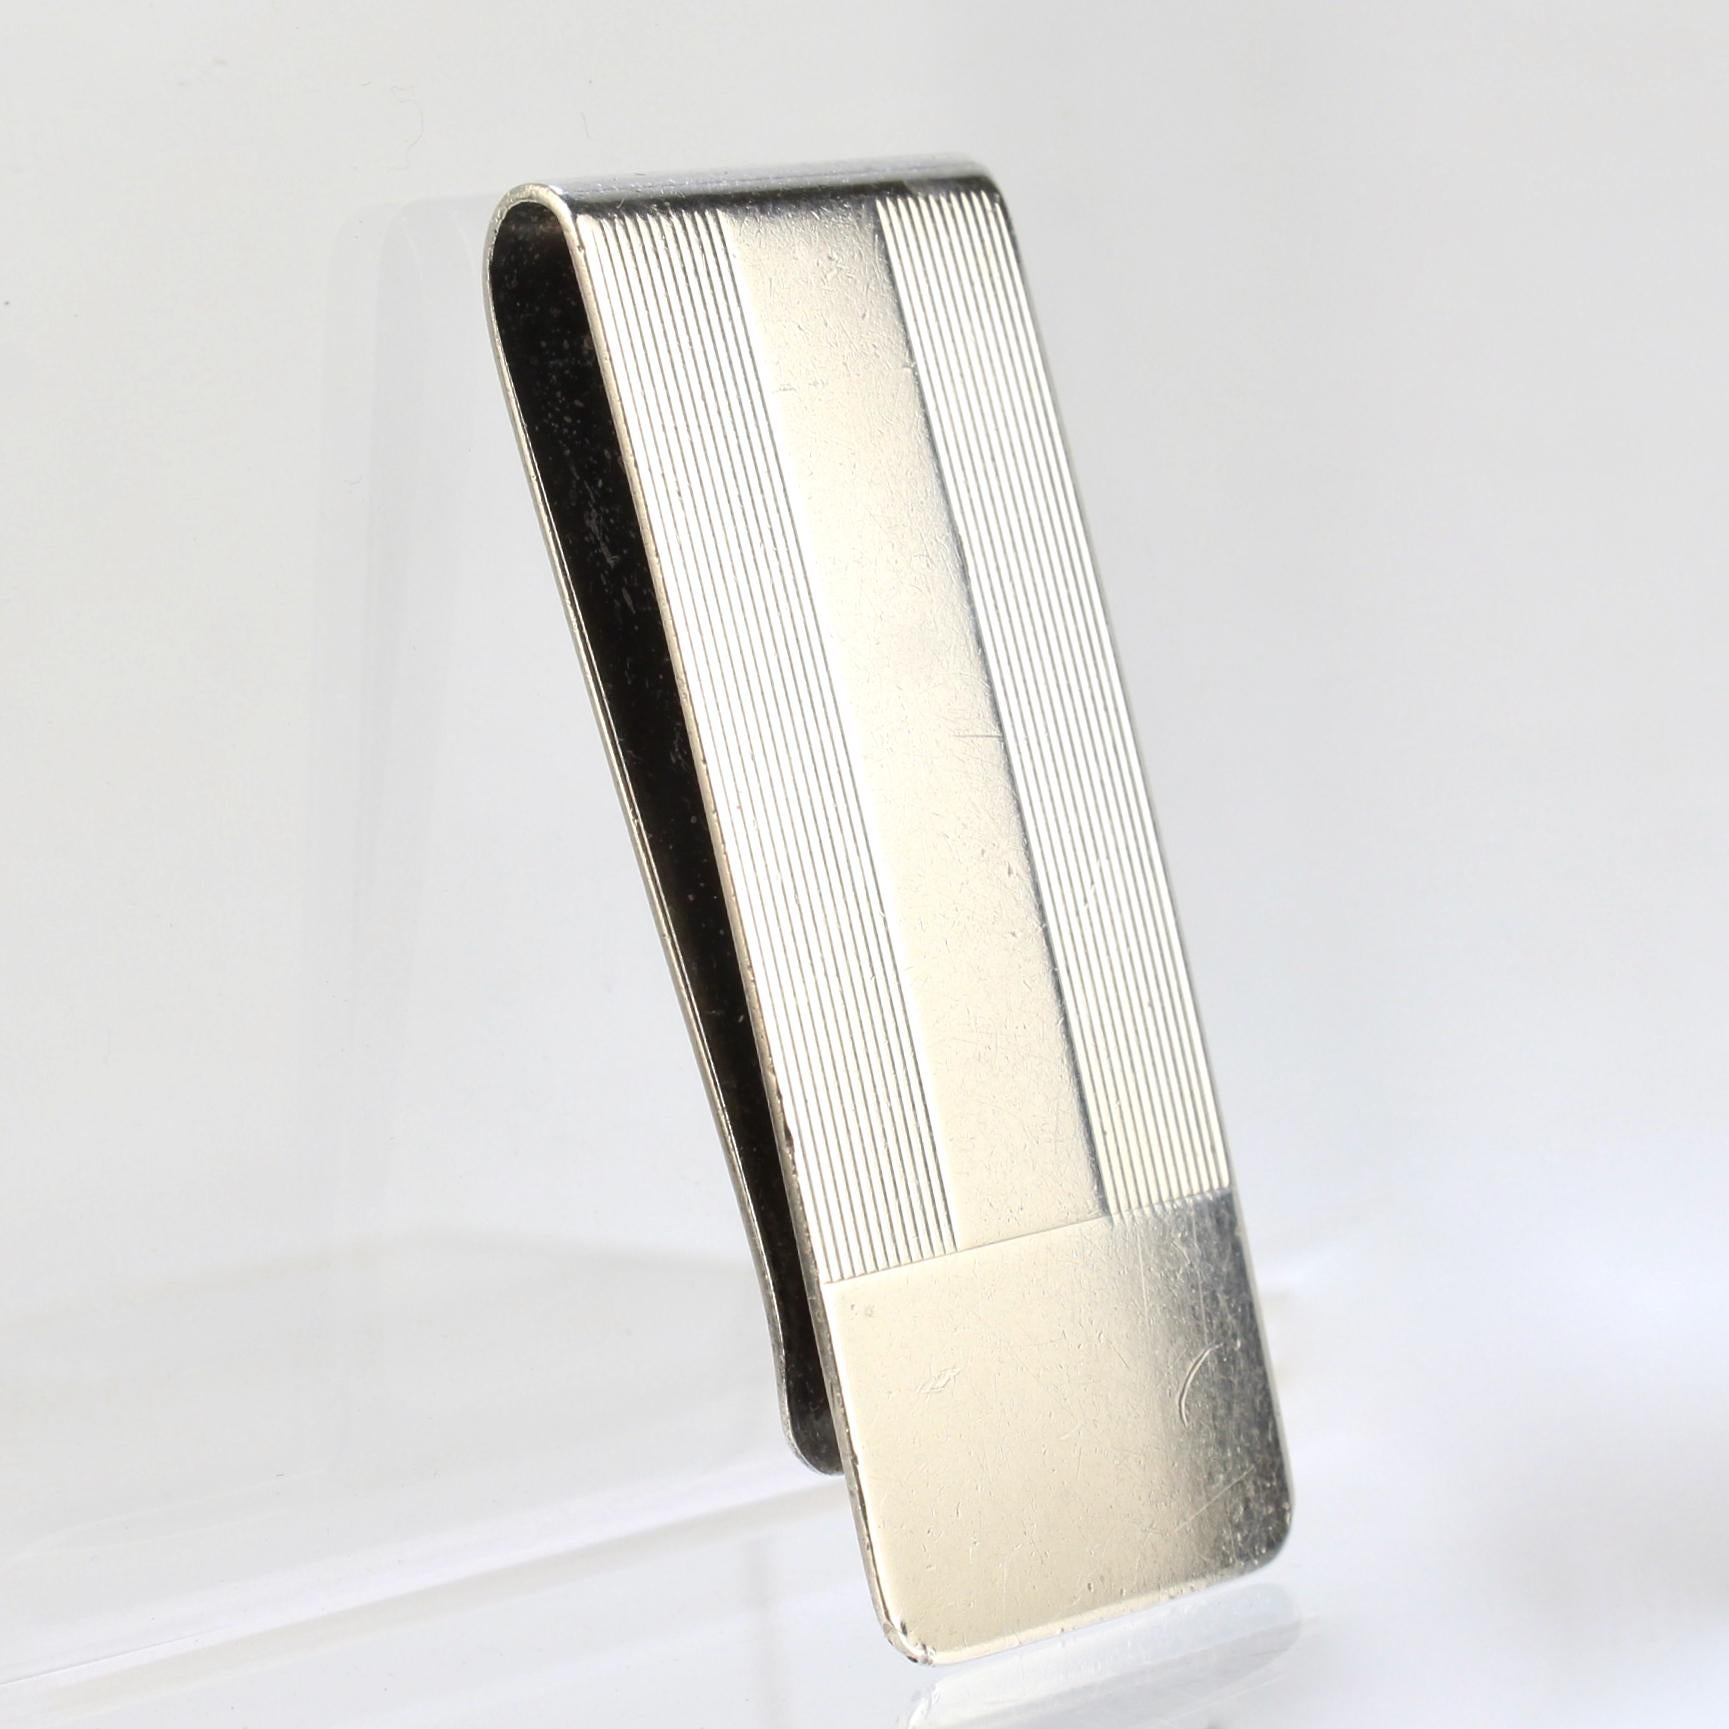 A very fine Tiffany & Co. money clip.

In sterling silver.

With fine linear engraved decoration.

A great everyday Tiffany piece!

Date:
20th Century

Overall Condition:
It is in overall fair, as-pictured, used estate condition.

Condition